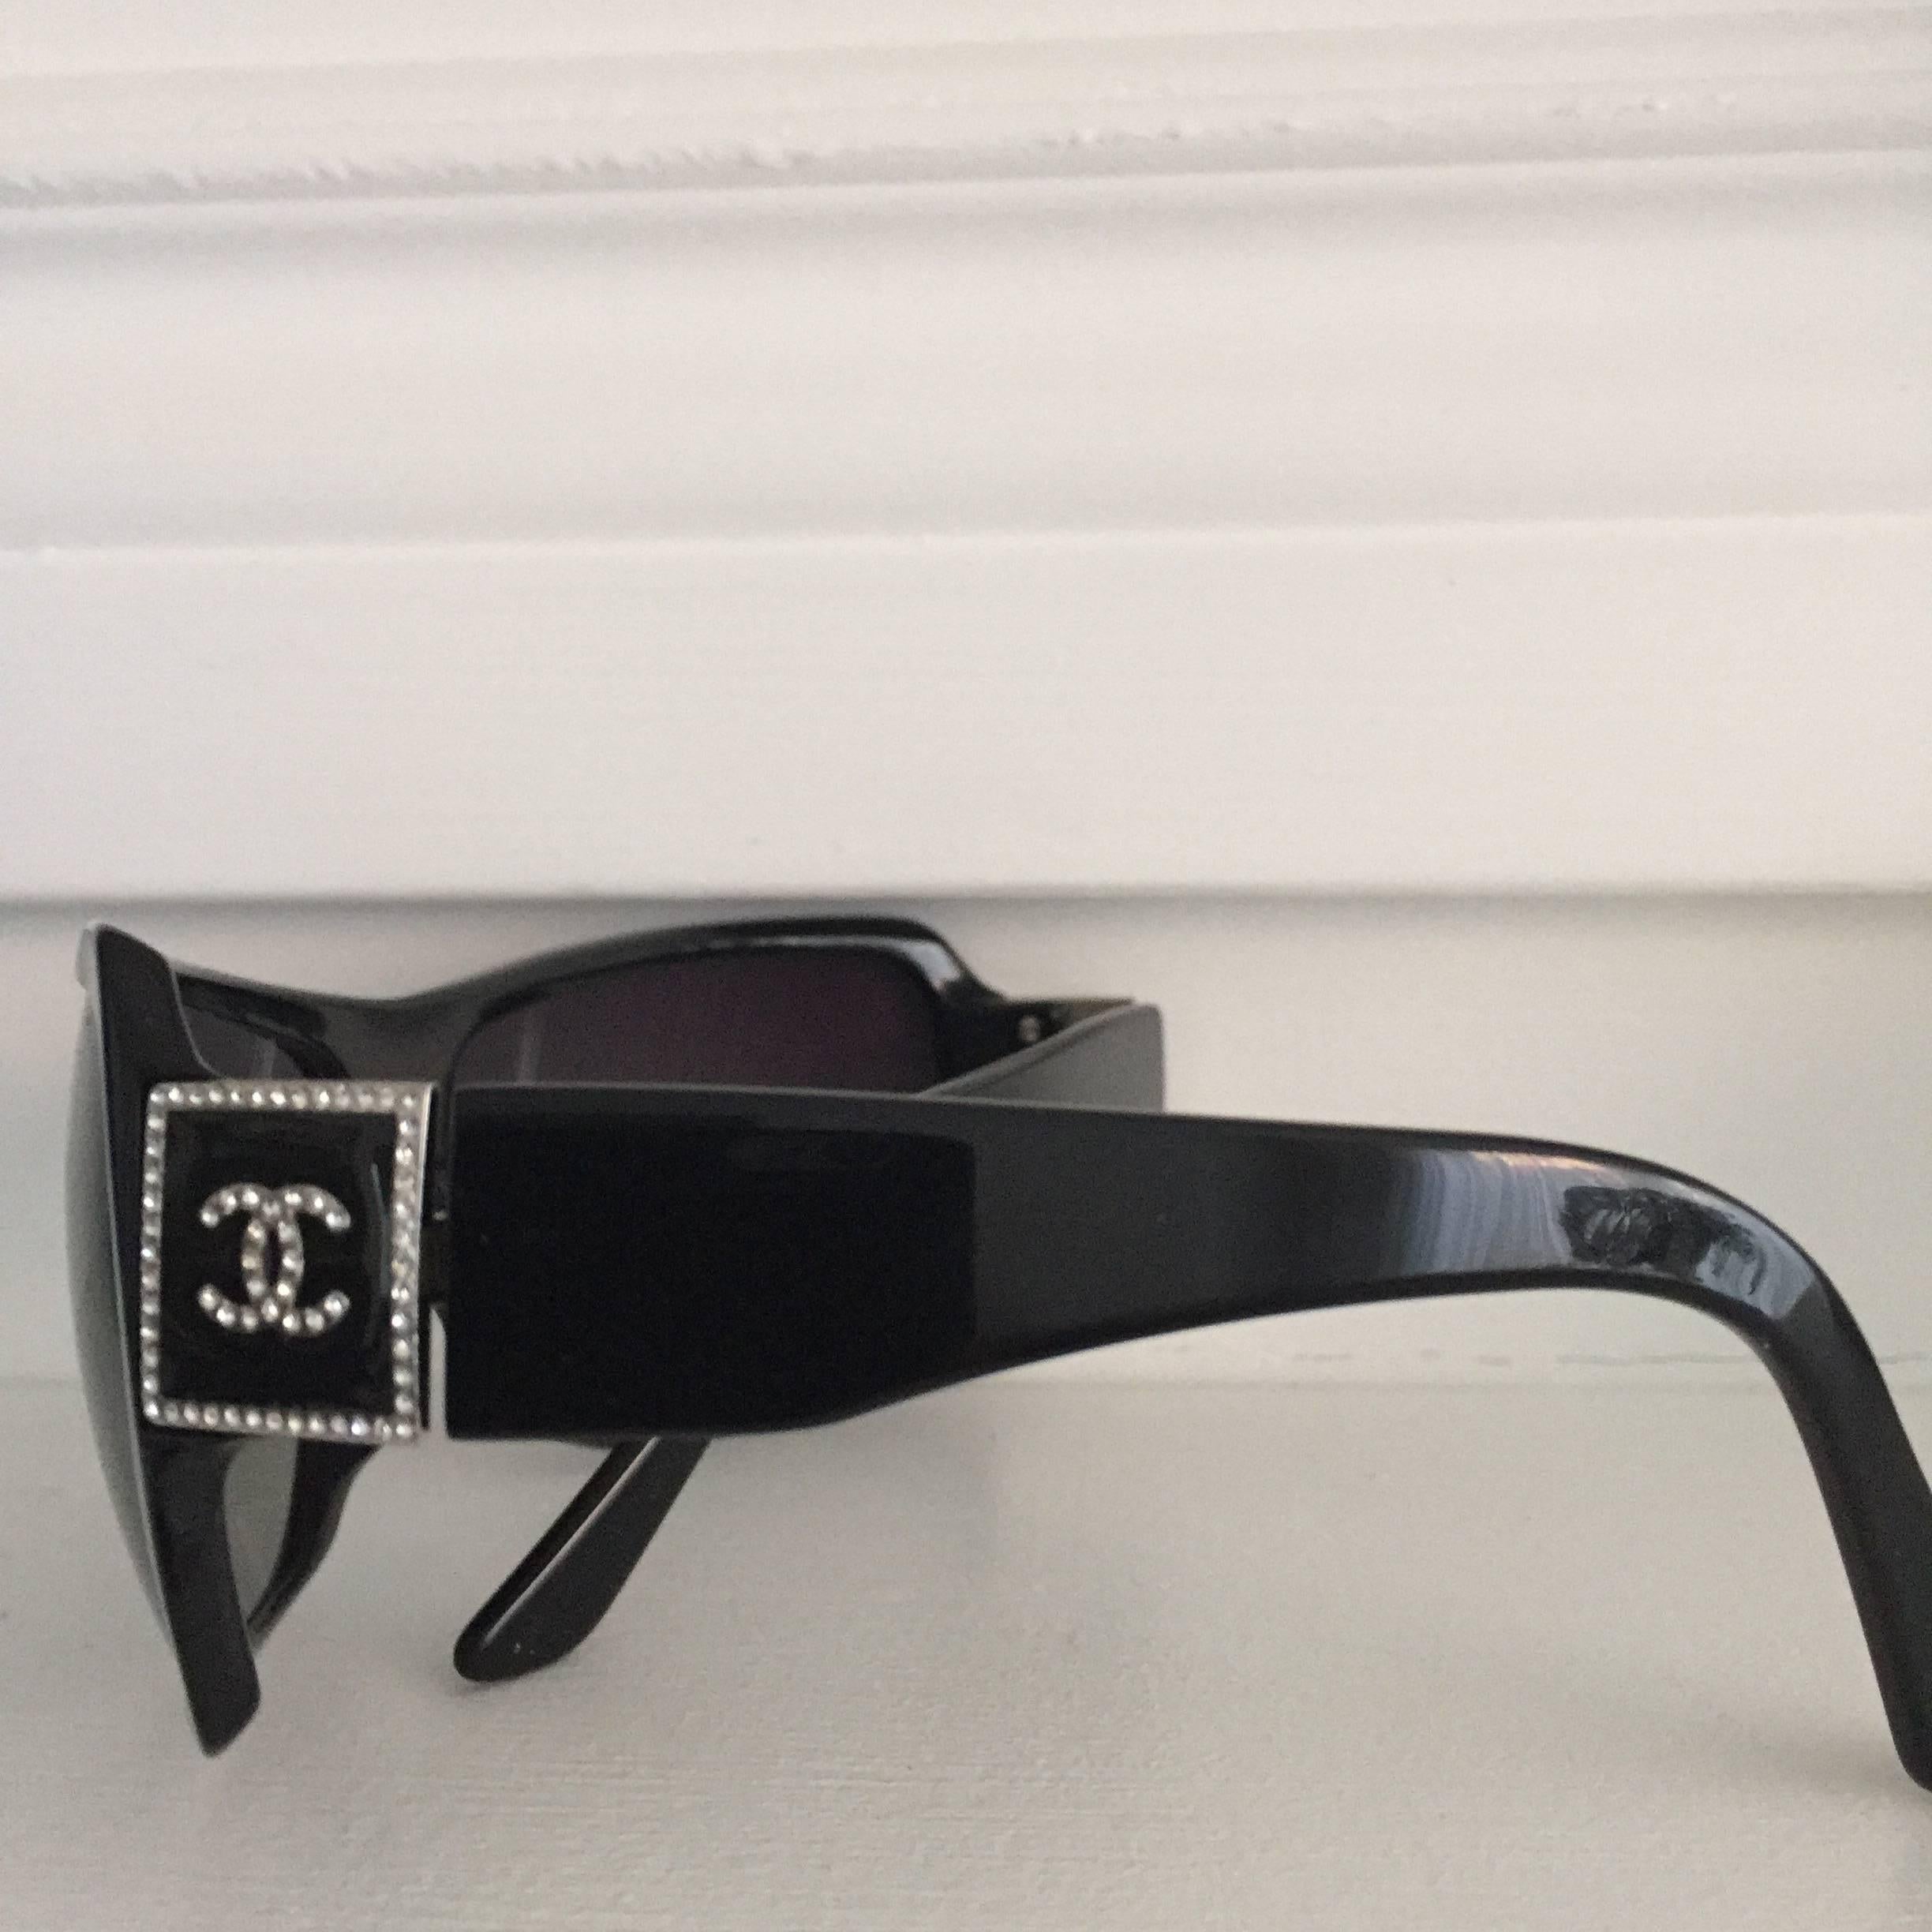 These sunglasses feature a cutting edge style with signature
logo pattern embedded on the sides in Swarovski crystals.
Perfect on sunny days....
comes in case and pouch

